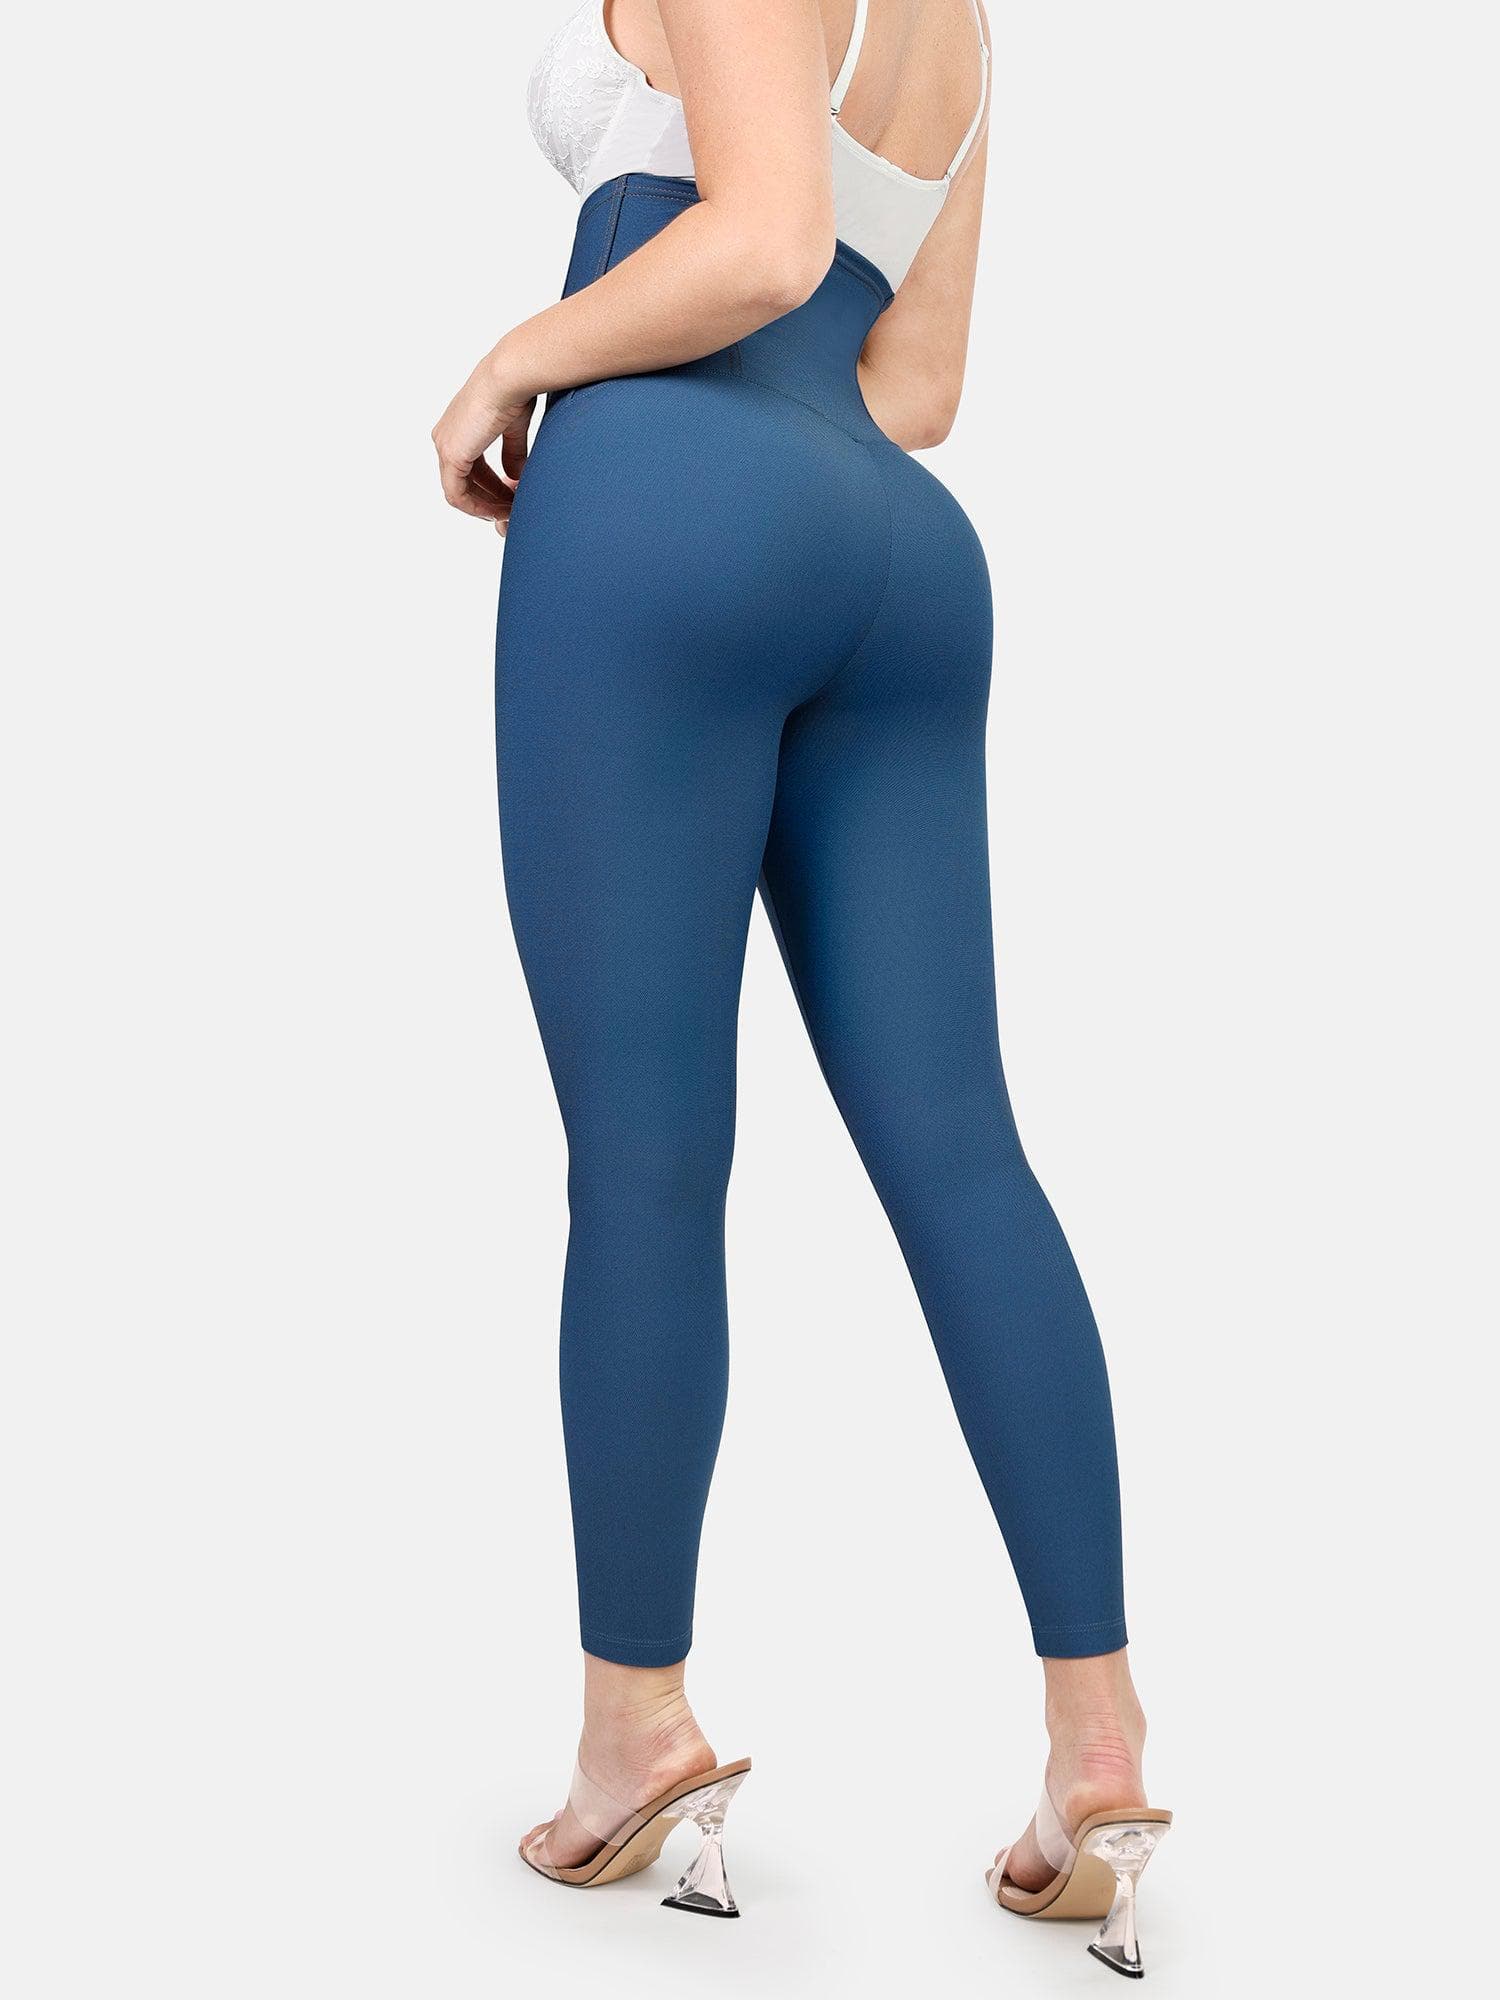 Jean Look Leggings For Women High Waist Tummy Control With Back